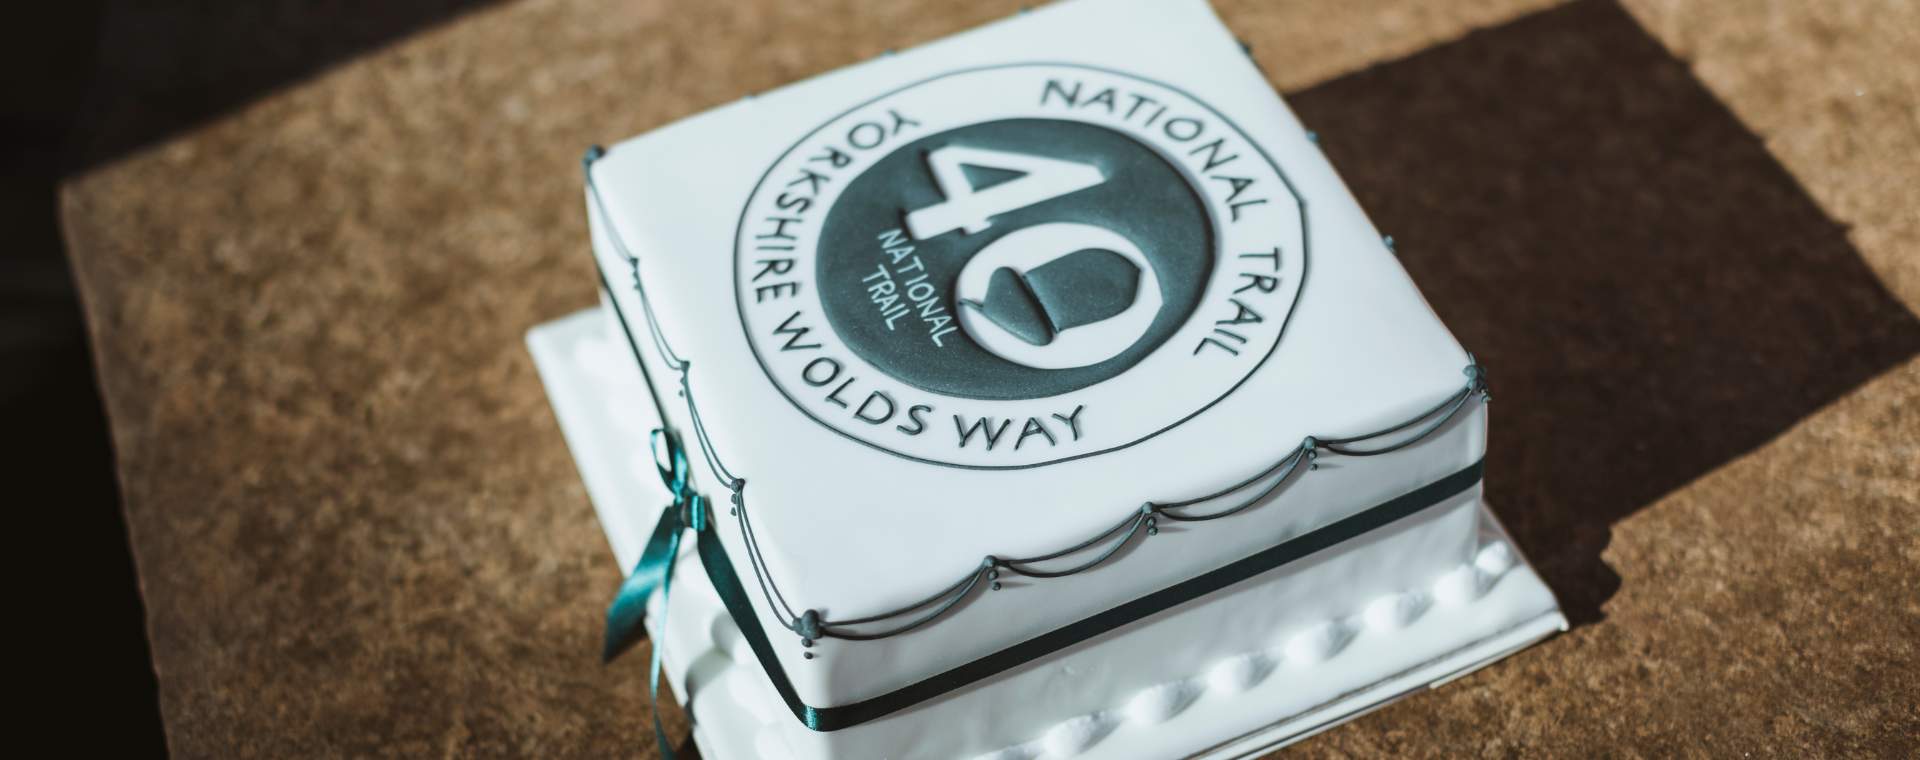 A cake to celebrate 40 years of the Yorkshire Wolds Way National Trail in East Yorkshire